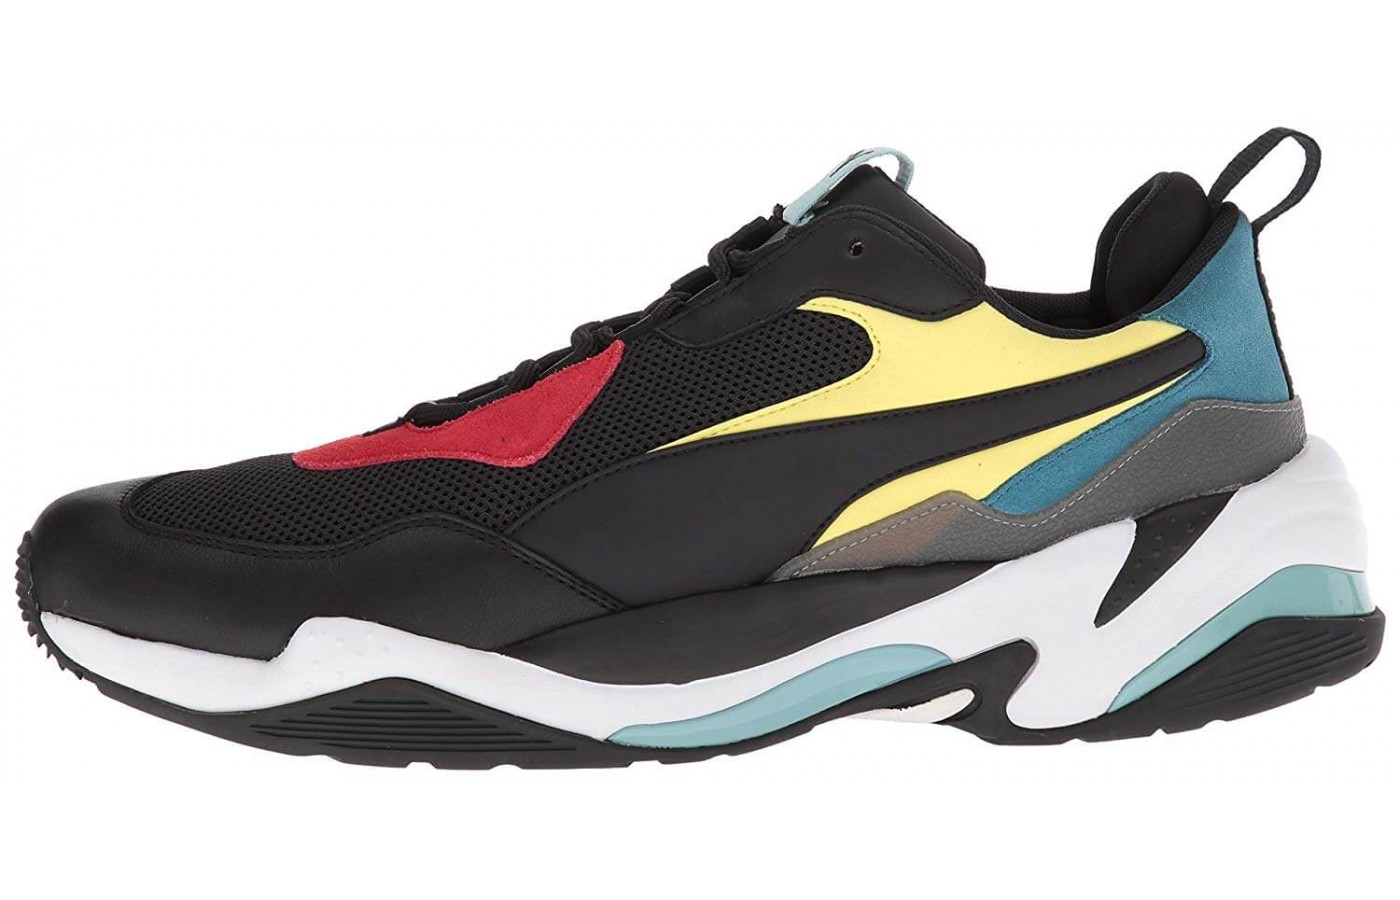 Puma's Thunder Spectra rocks the classic form strip of the brand.